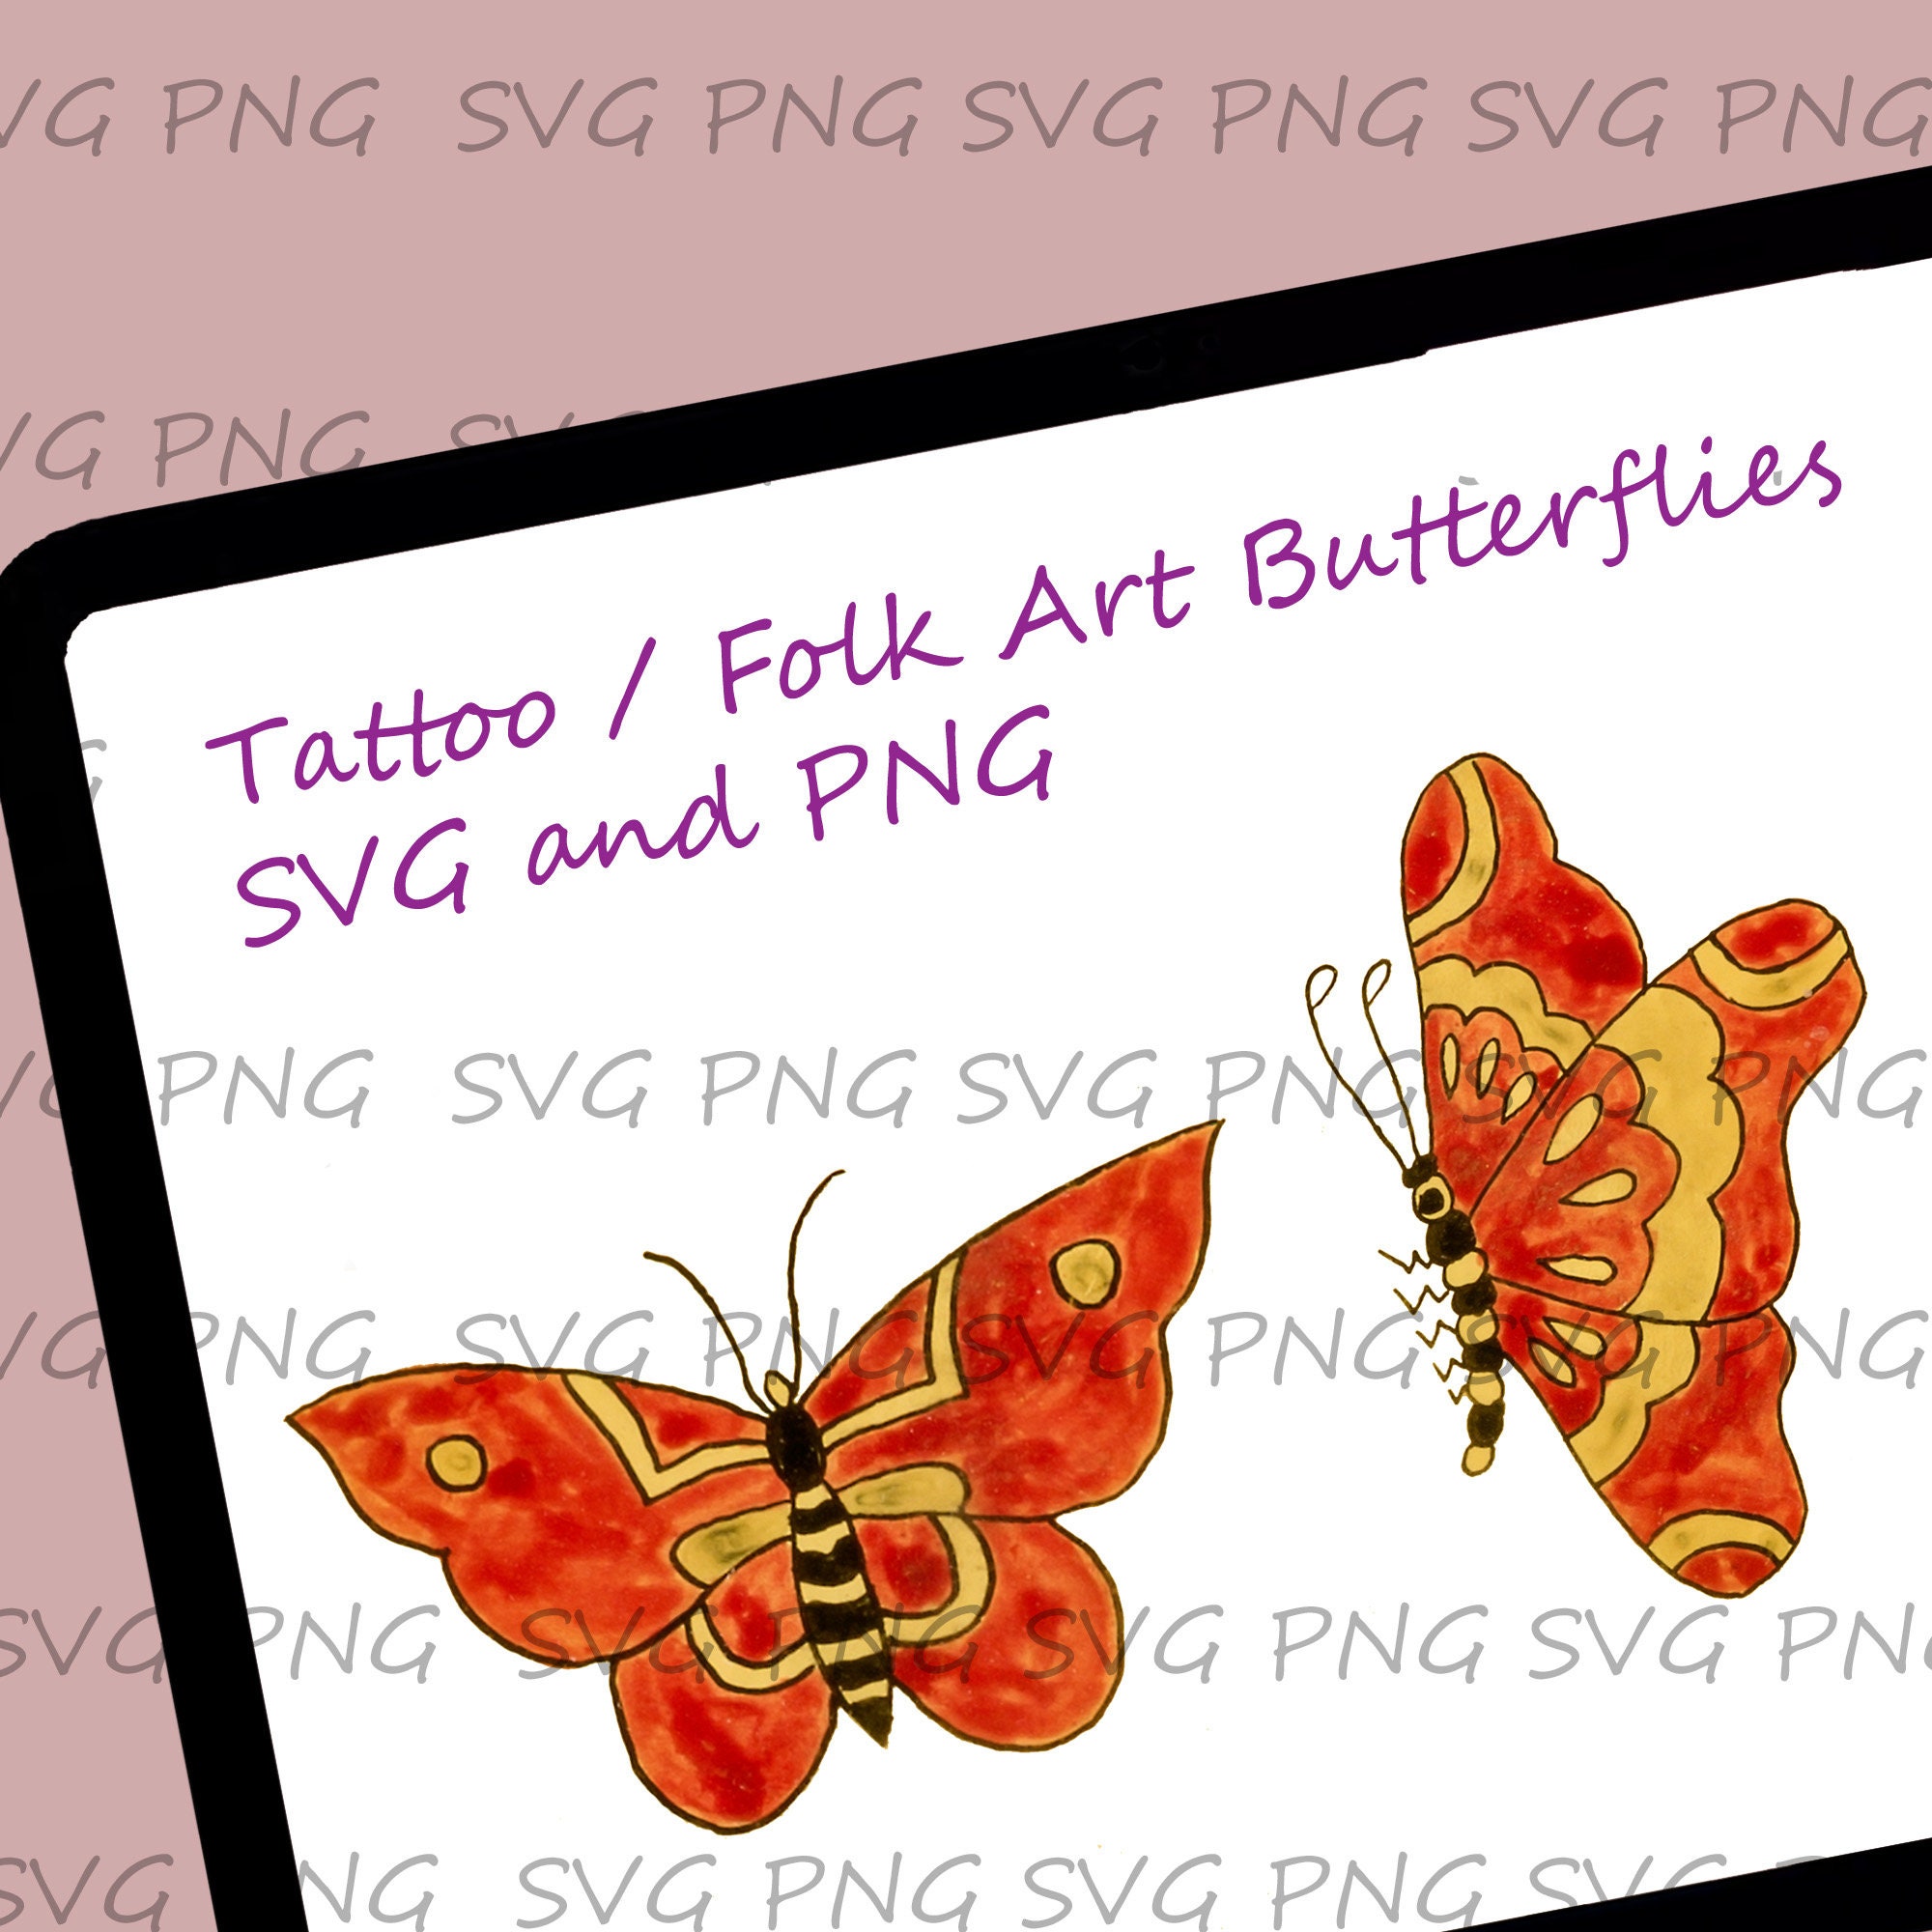 Vintage Butterfly Tattoo png hd Transparent Background Image  LifePng